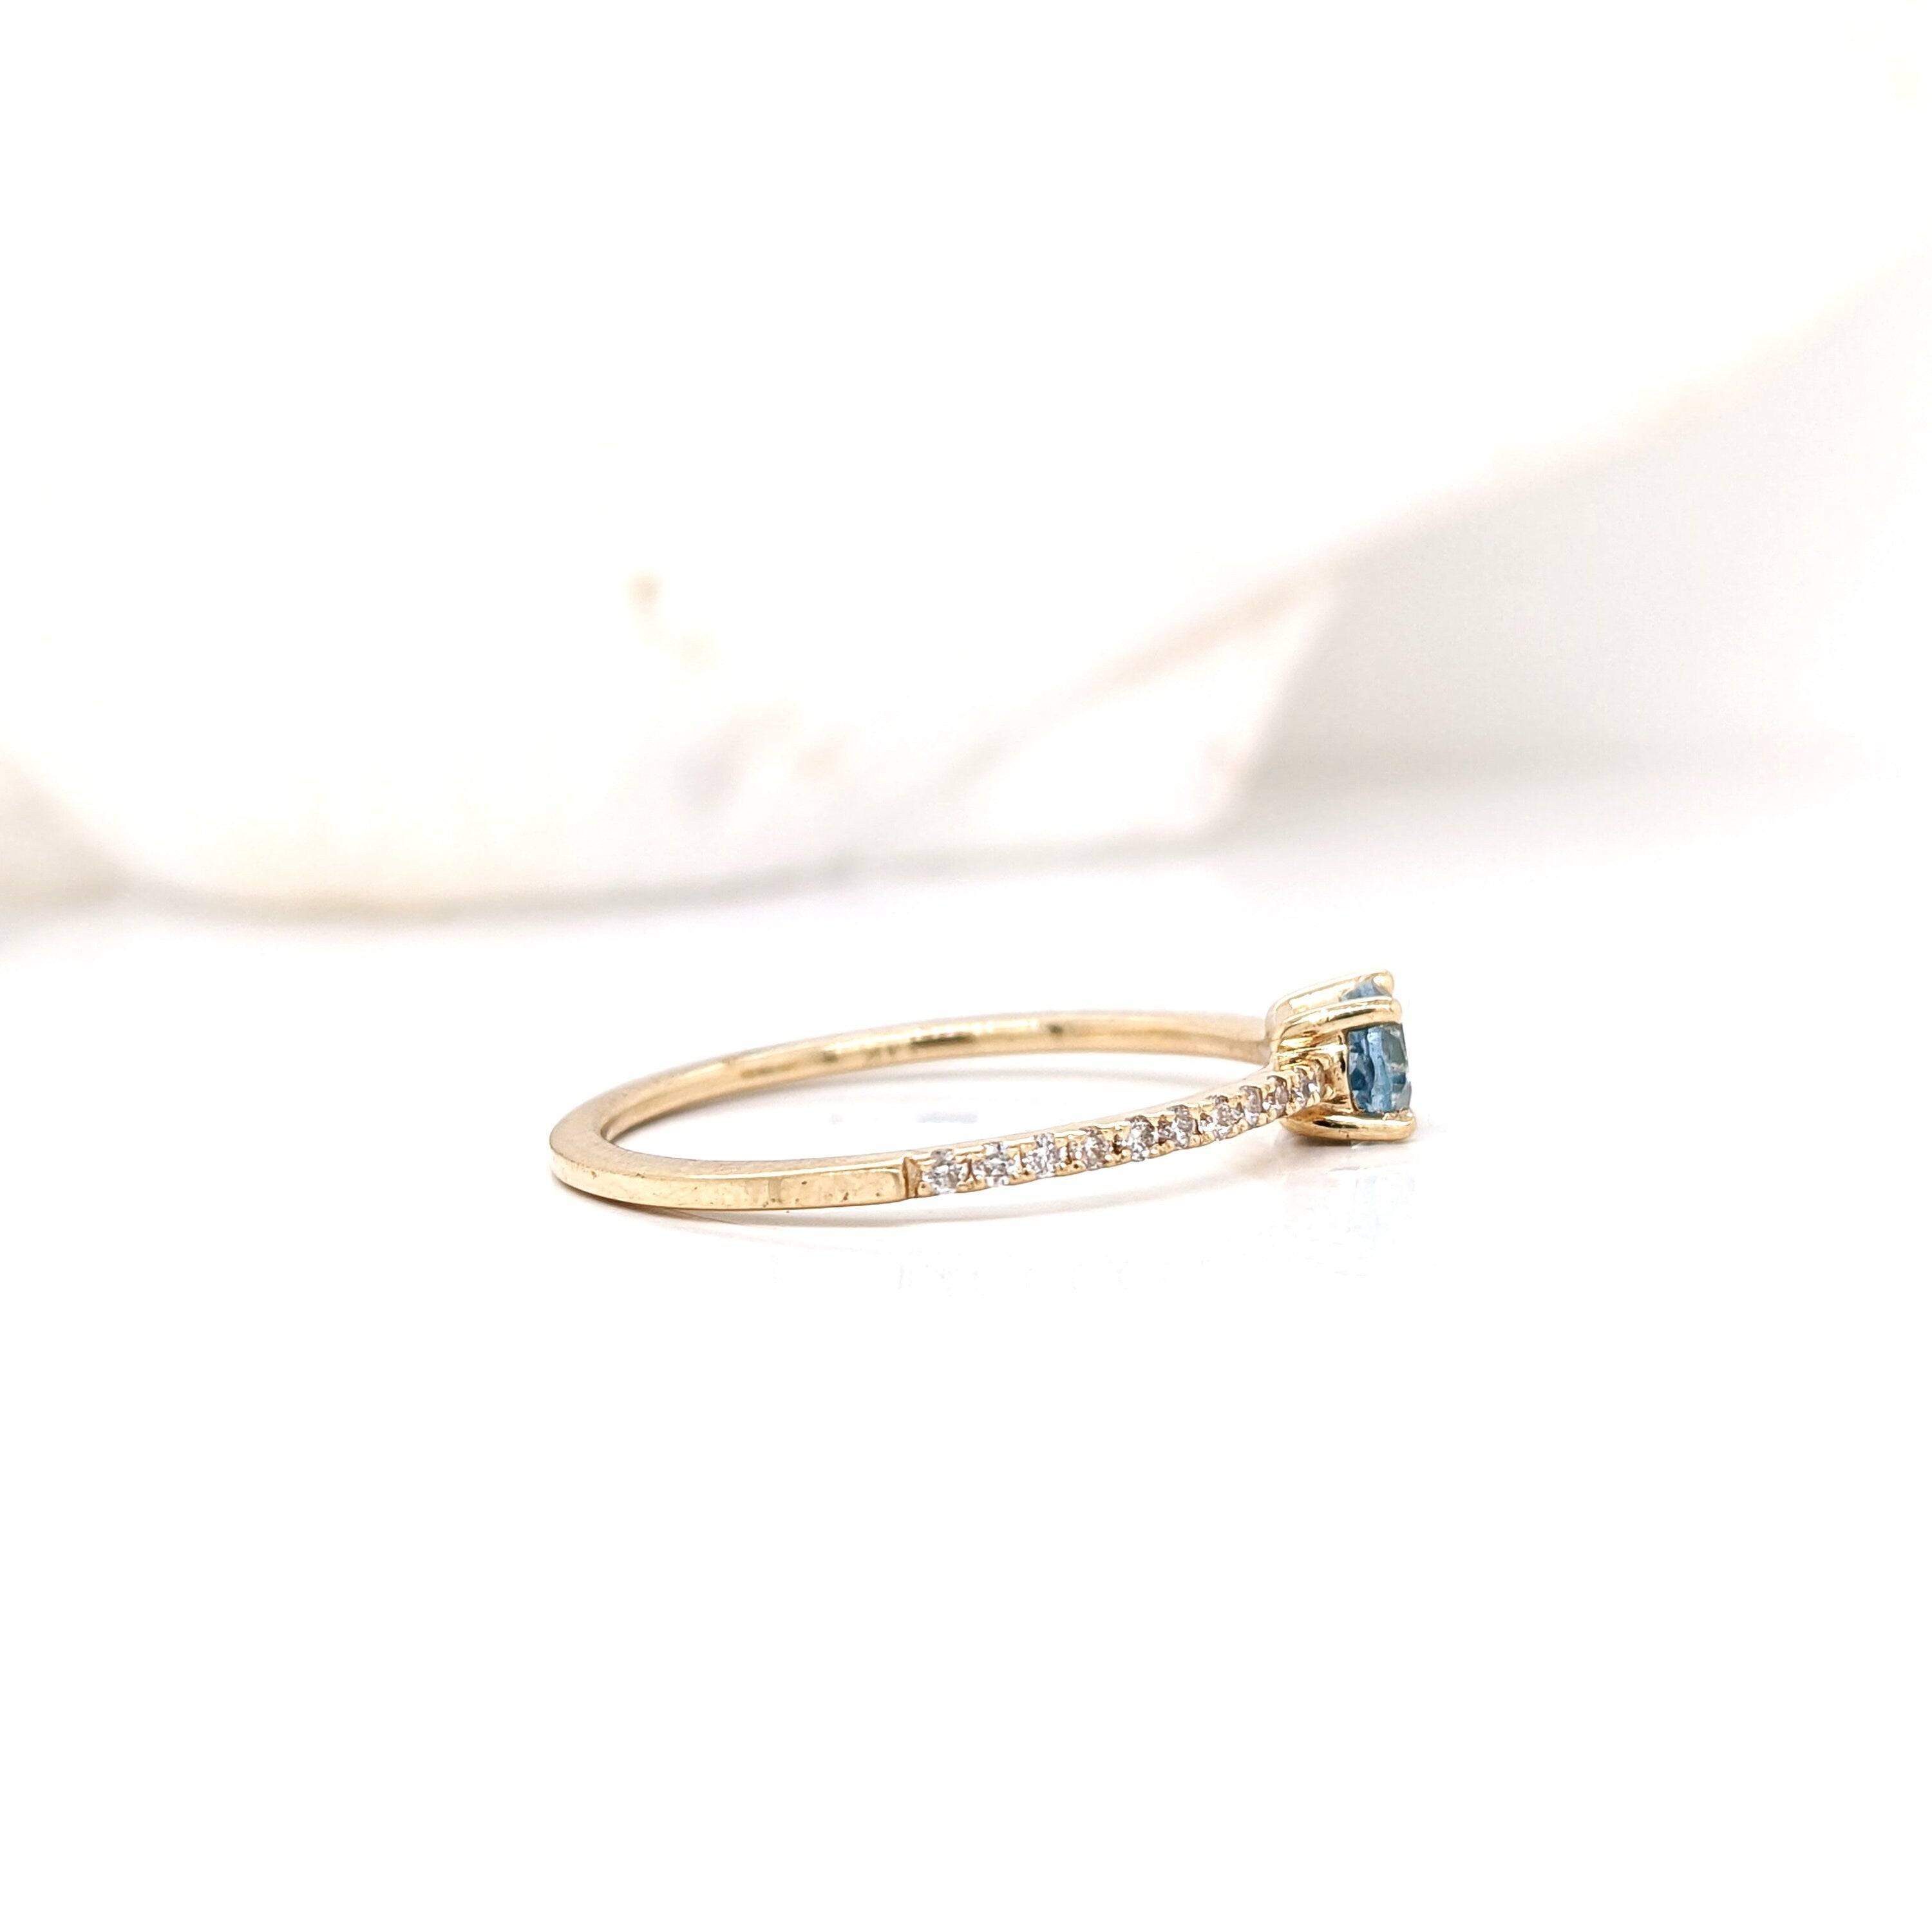 East West Minimalist Aqua Blue Natural Aquamarine Ring in 14k Gold w Natural Diamond Pave Shank | Oval 4x3mm | March Birthstone | Stackable